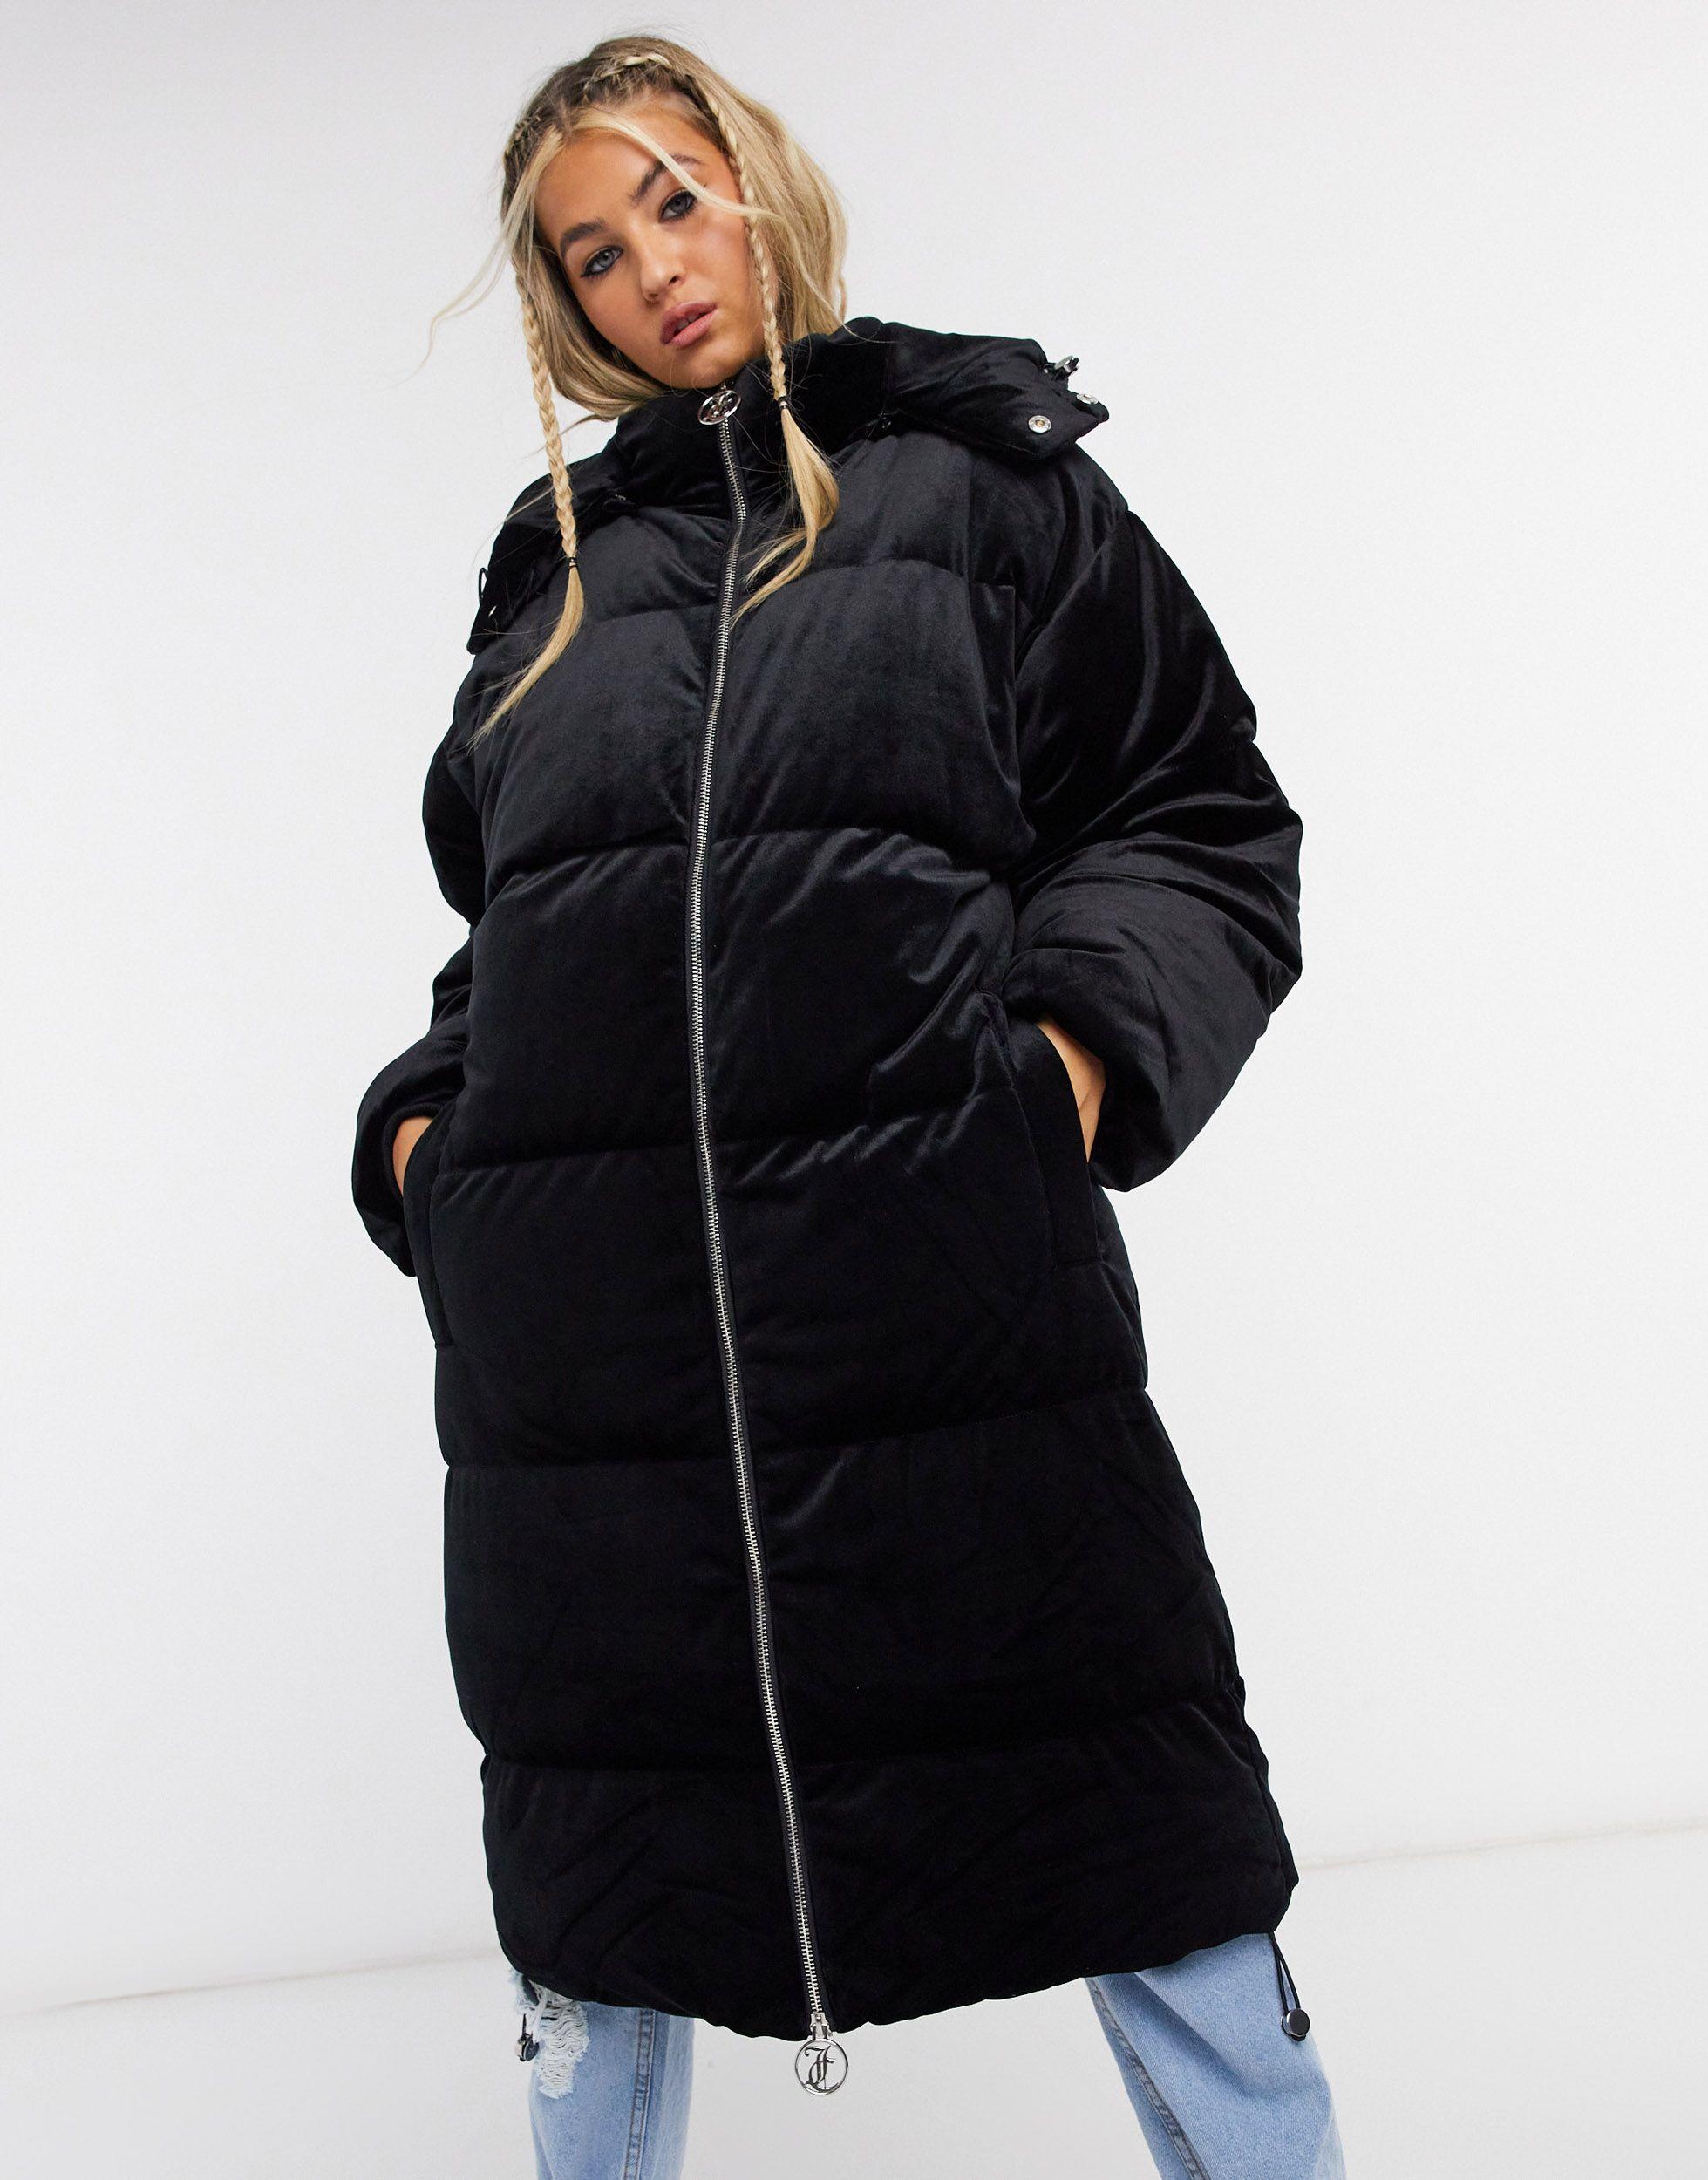 Juicy Couture Helena Puffer Coat in Black | Lyst